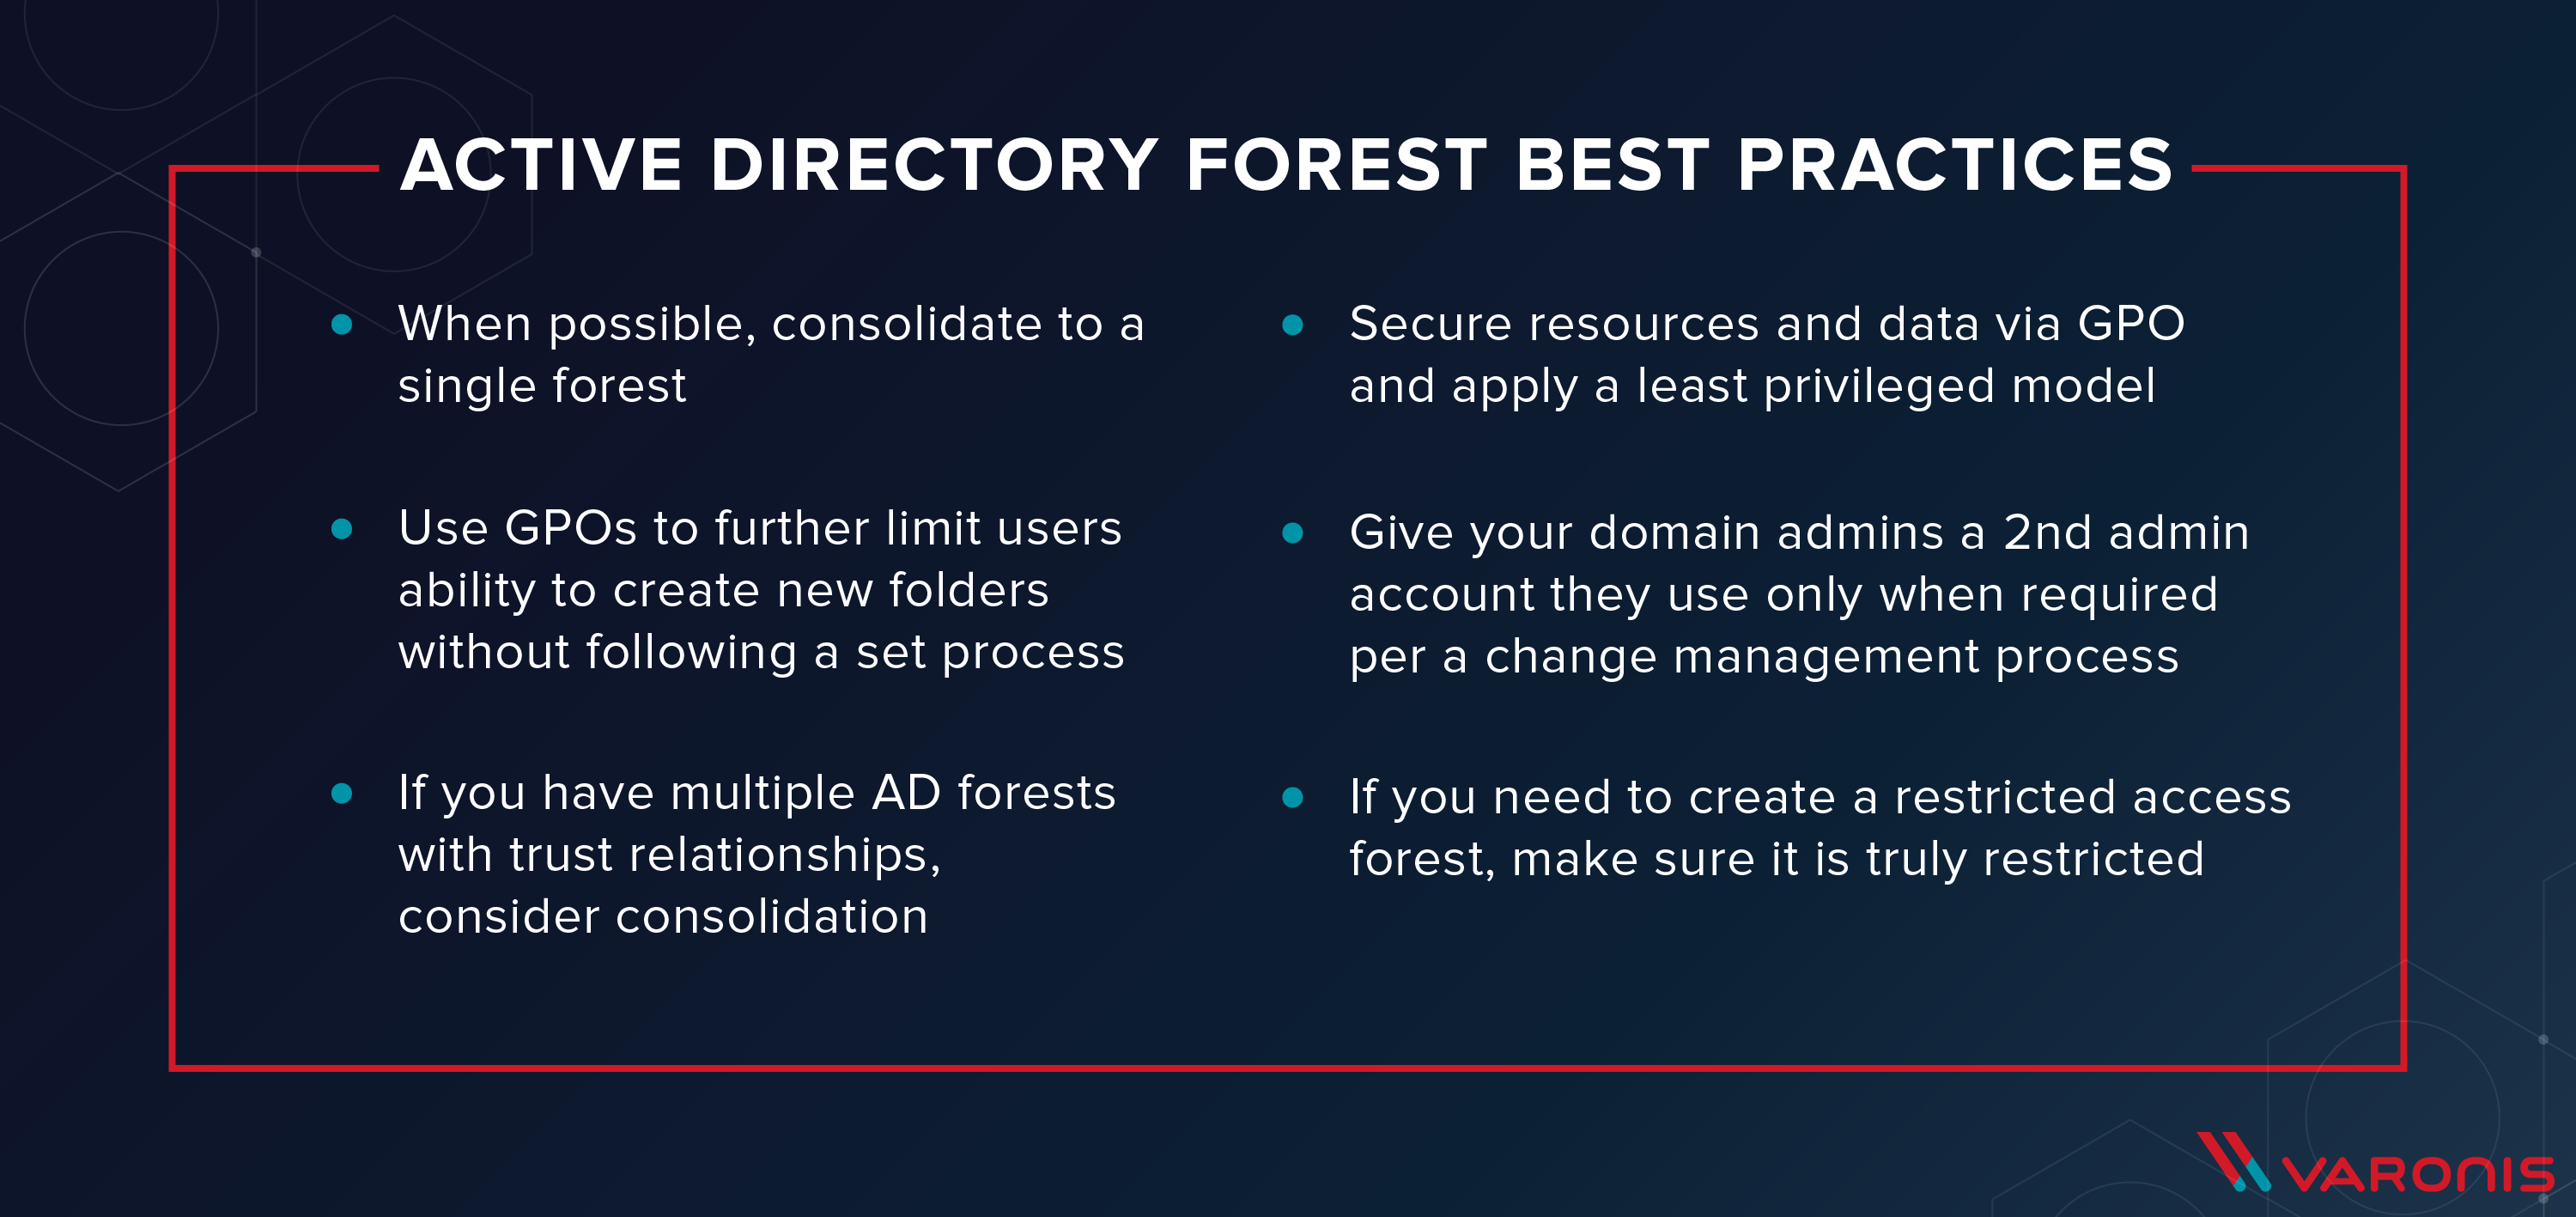 active directory forest best practices